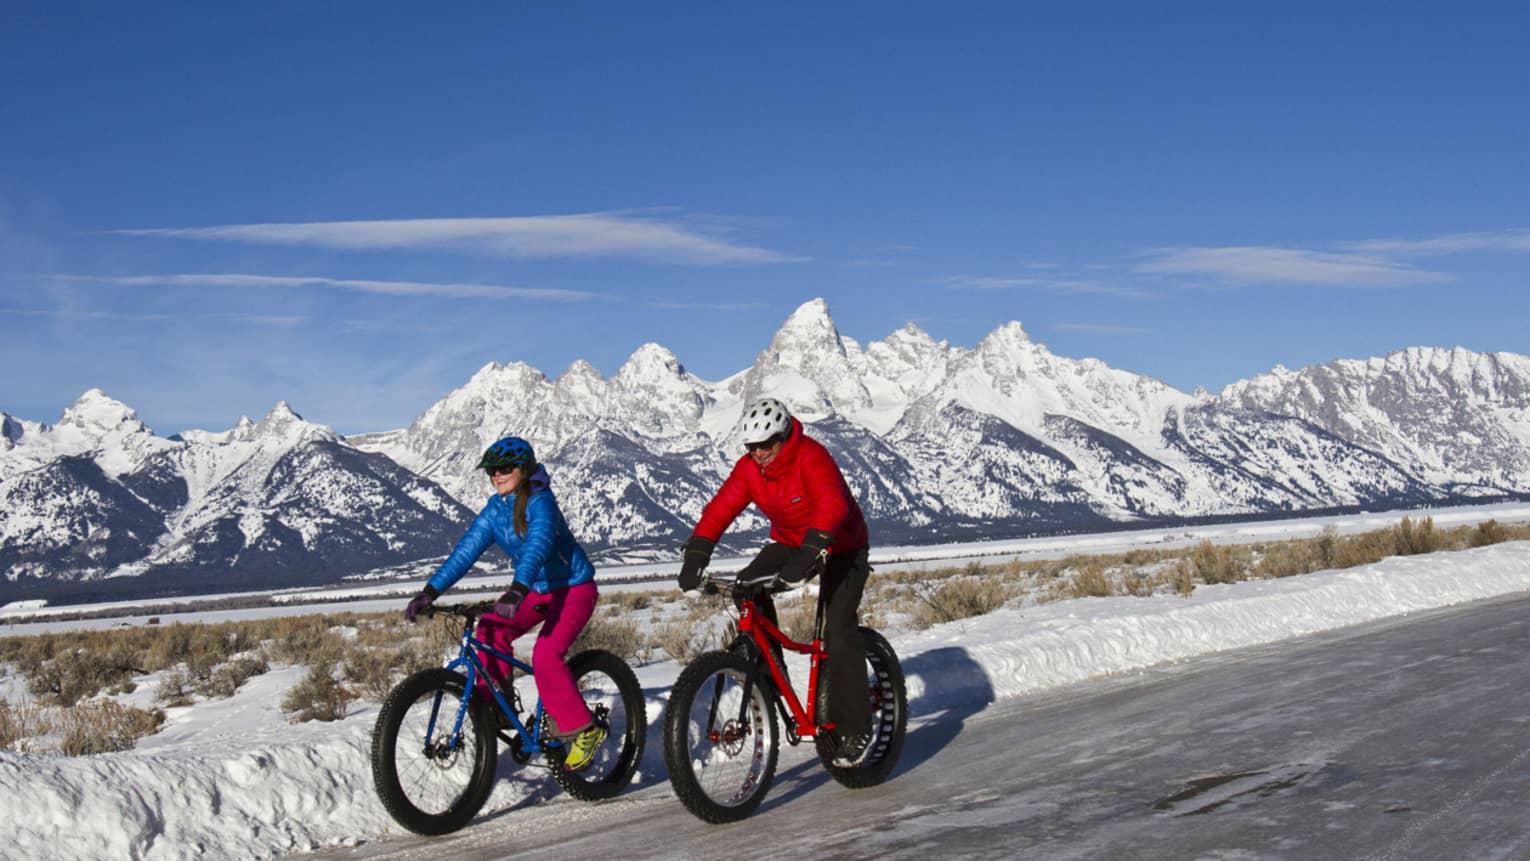 A man and woman bike down a path, snow-capped mountains and blue sky in the background